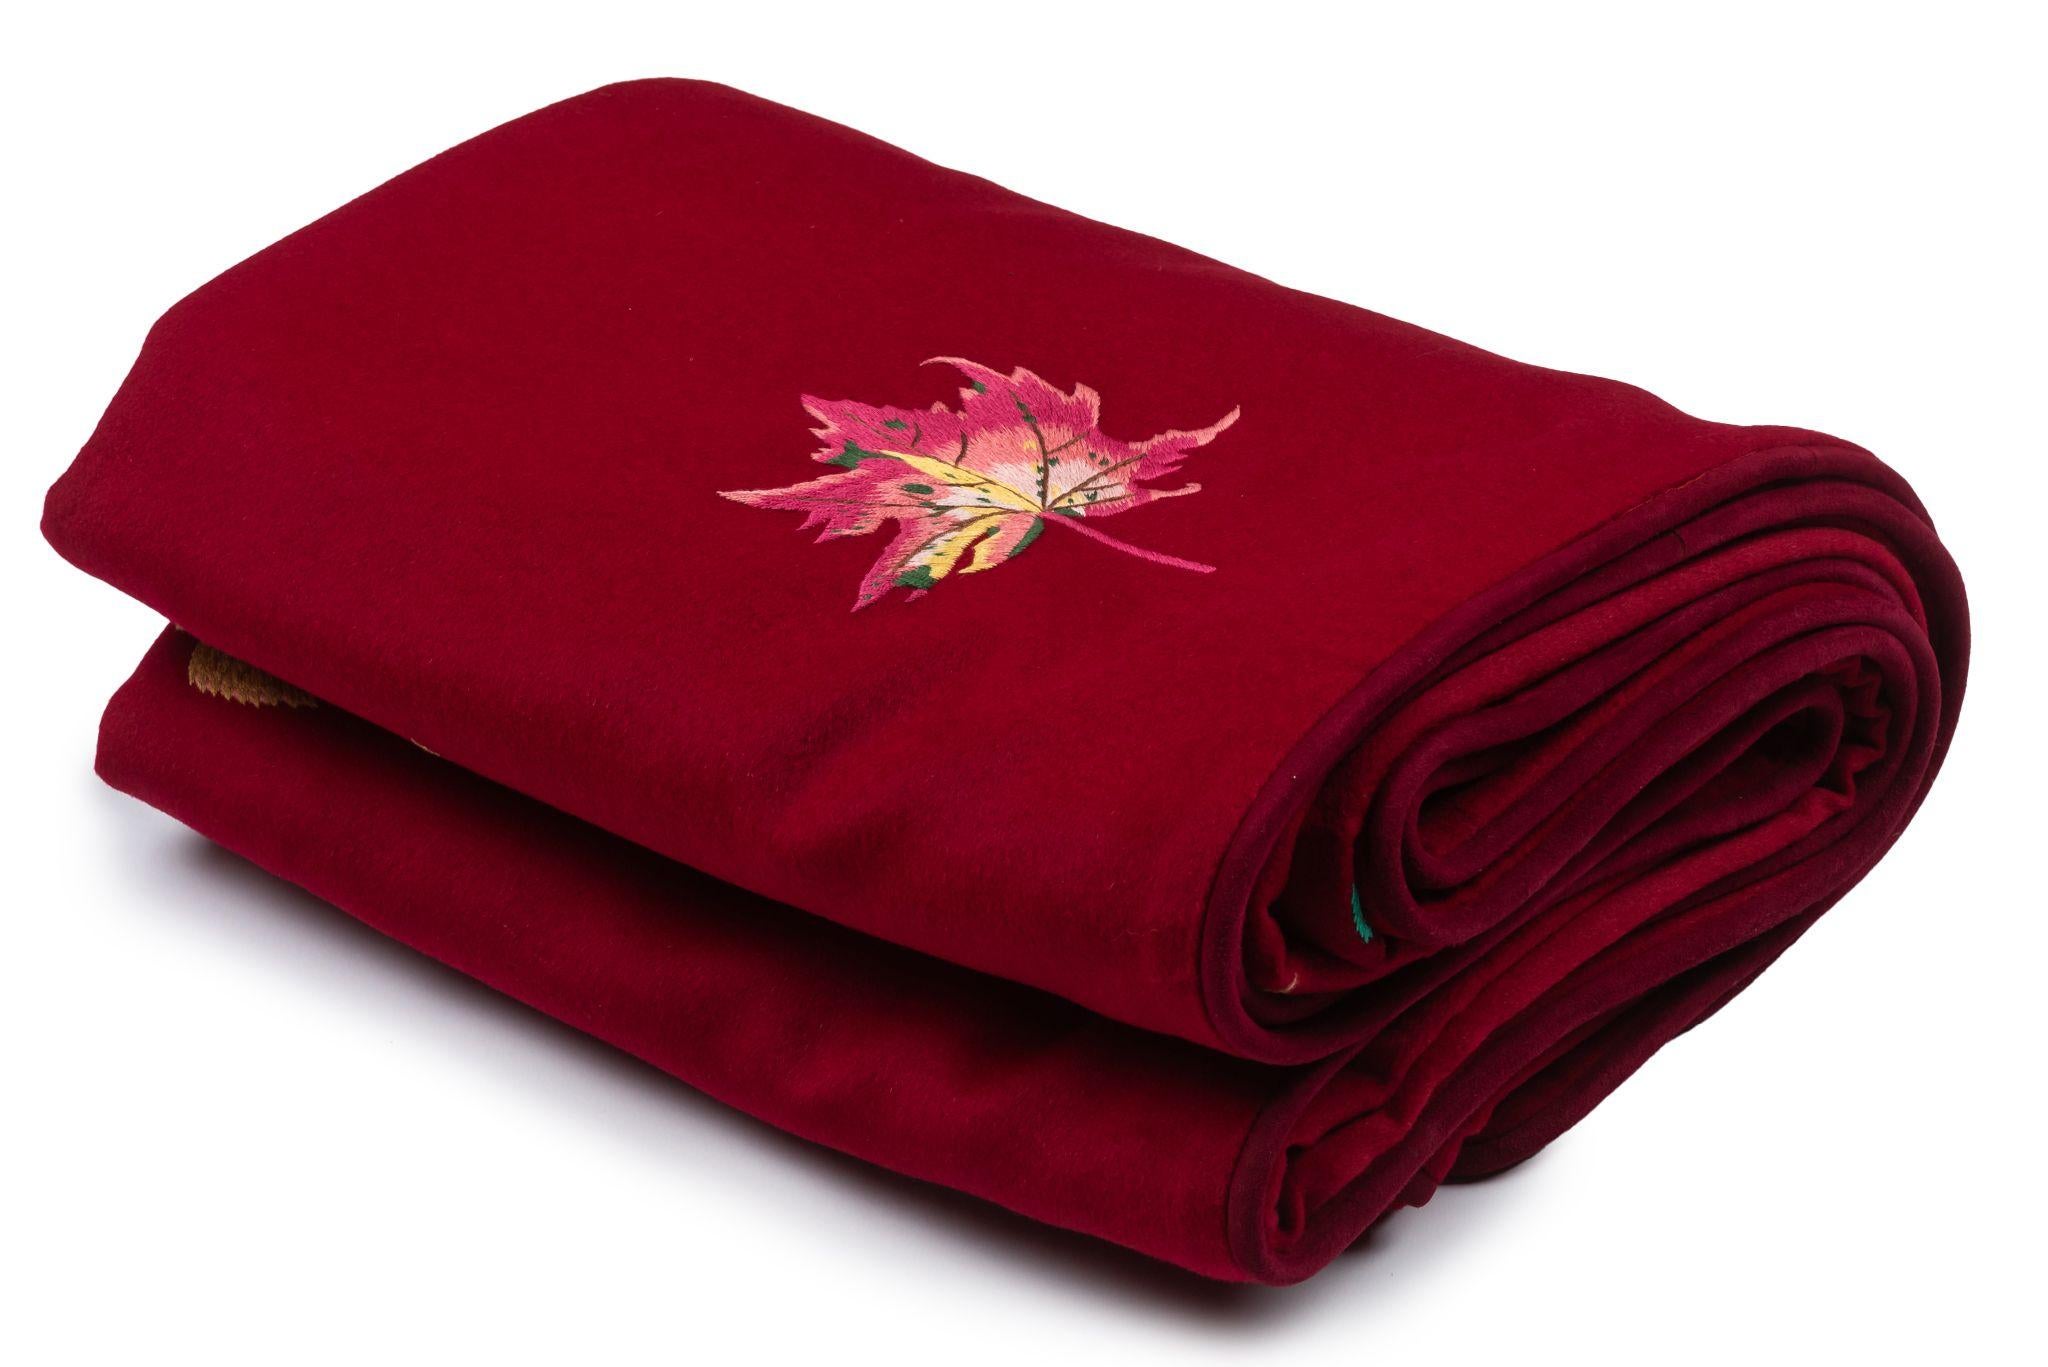 Hermès collectible burgundy king size blanket with embroidered leaves and flowers. Wool, cashmere, angora and suede trim. 
70% wool, 15% cashmere, 15% angora.
Mint condition.